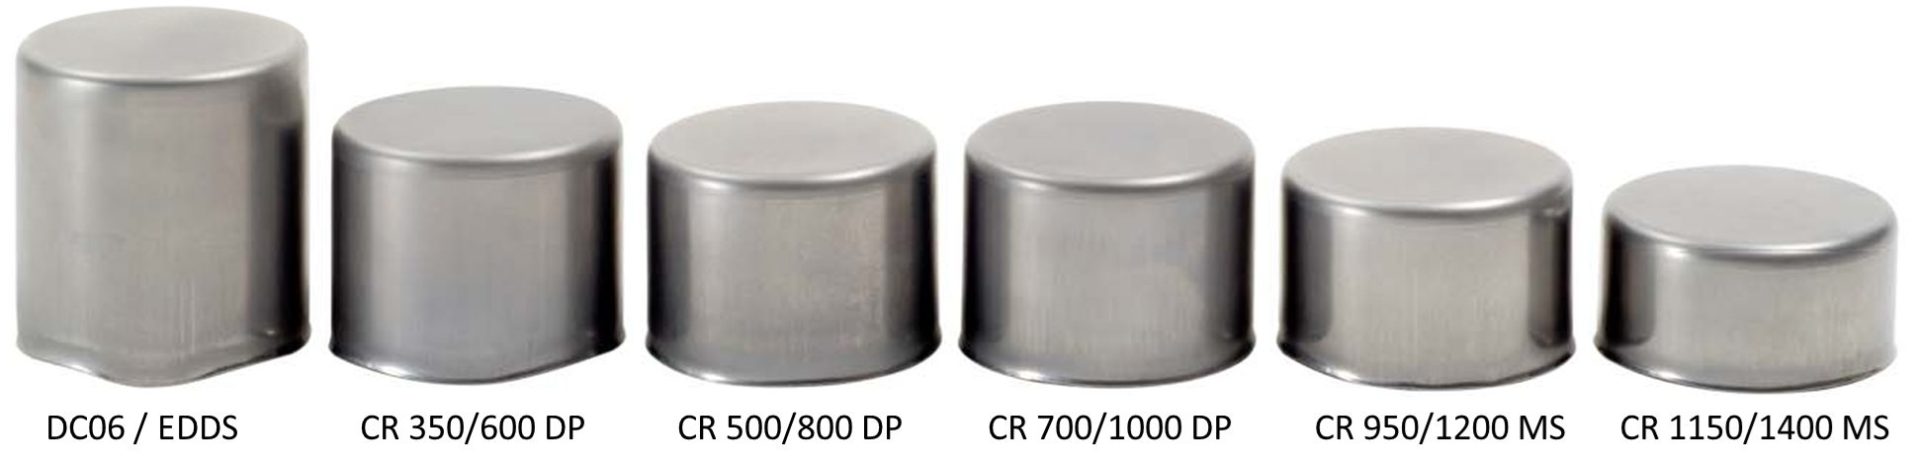 Figure 6: Cups used in the testing reported in Figure 5.S-26